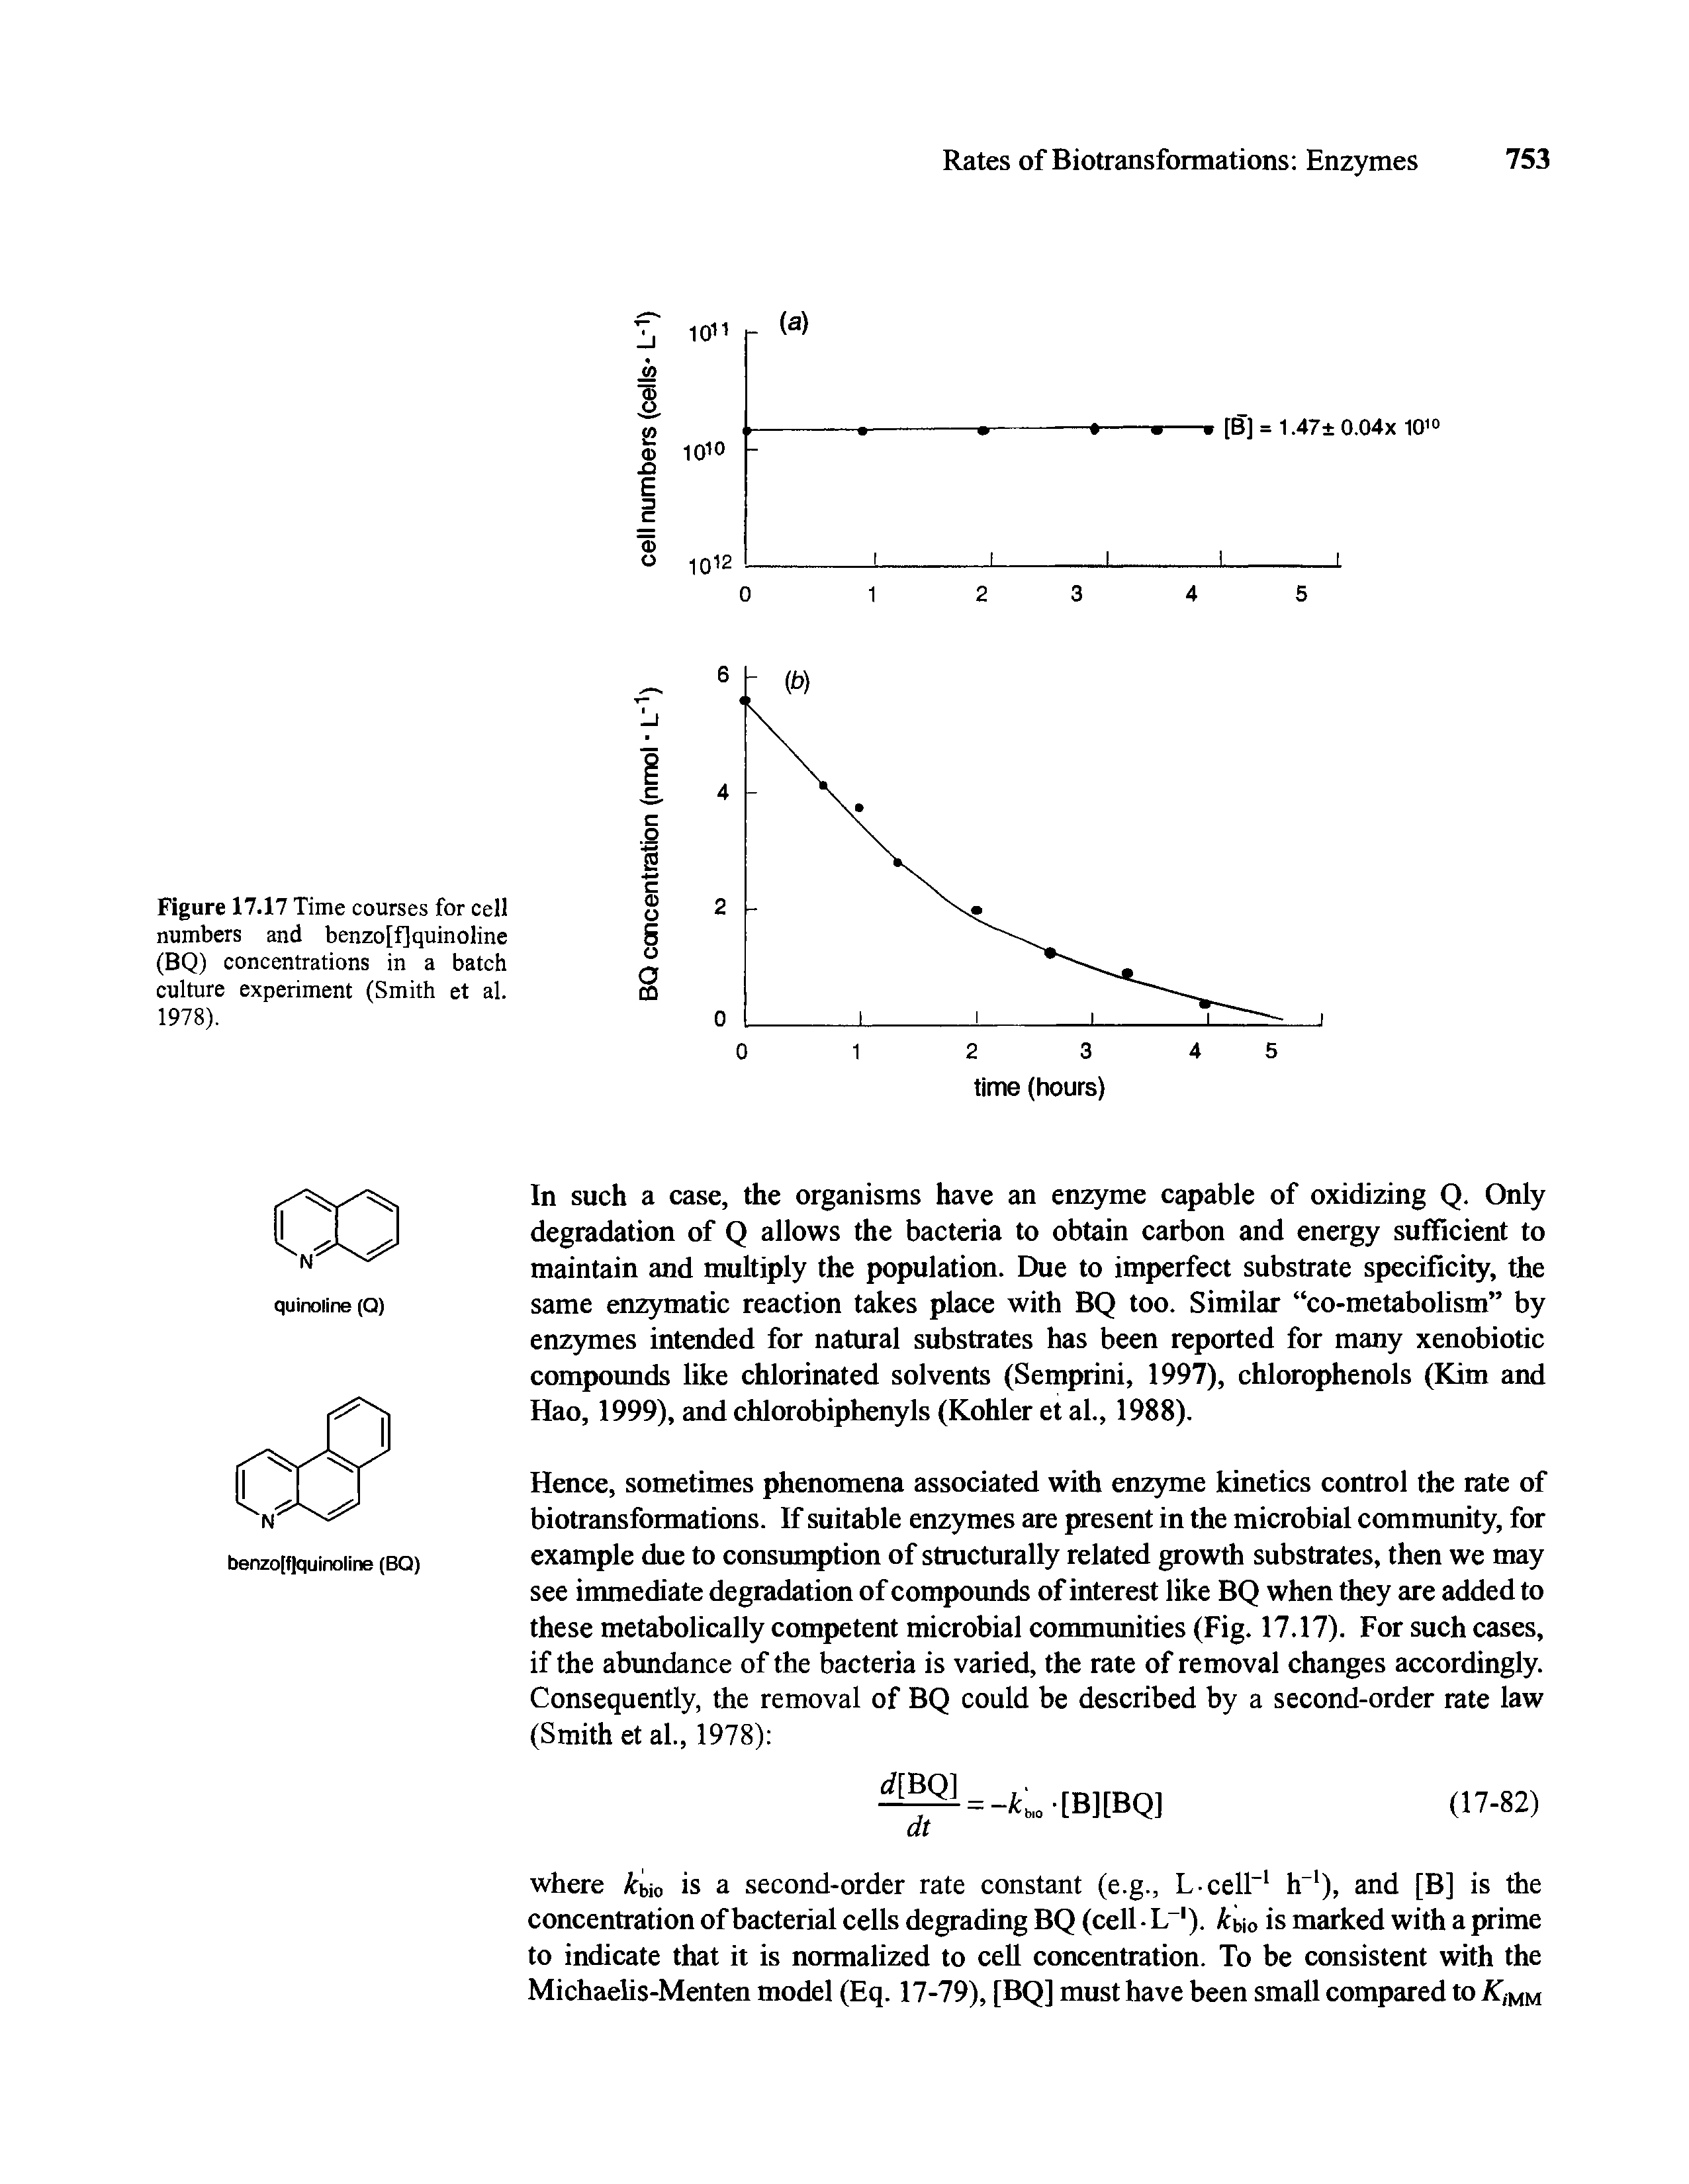 Figure 17.17 Time courses for cell numbers and benzo[f]quinoline (BQ) concentrations in a batch culture experiment (Smith et al. 1978).